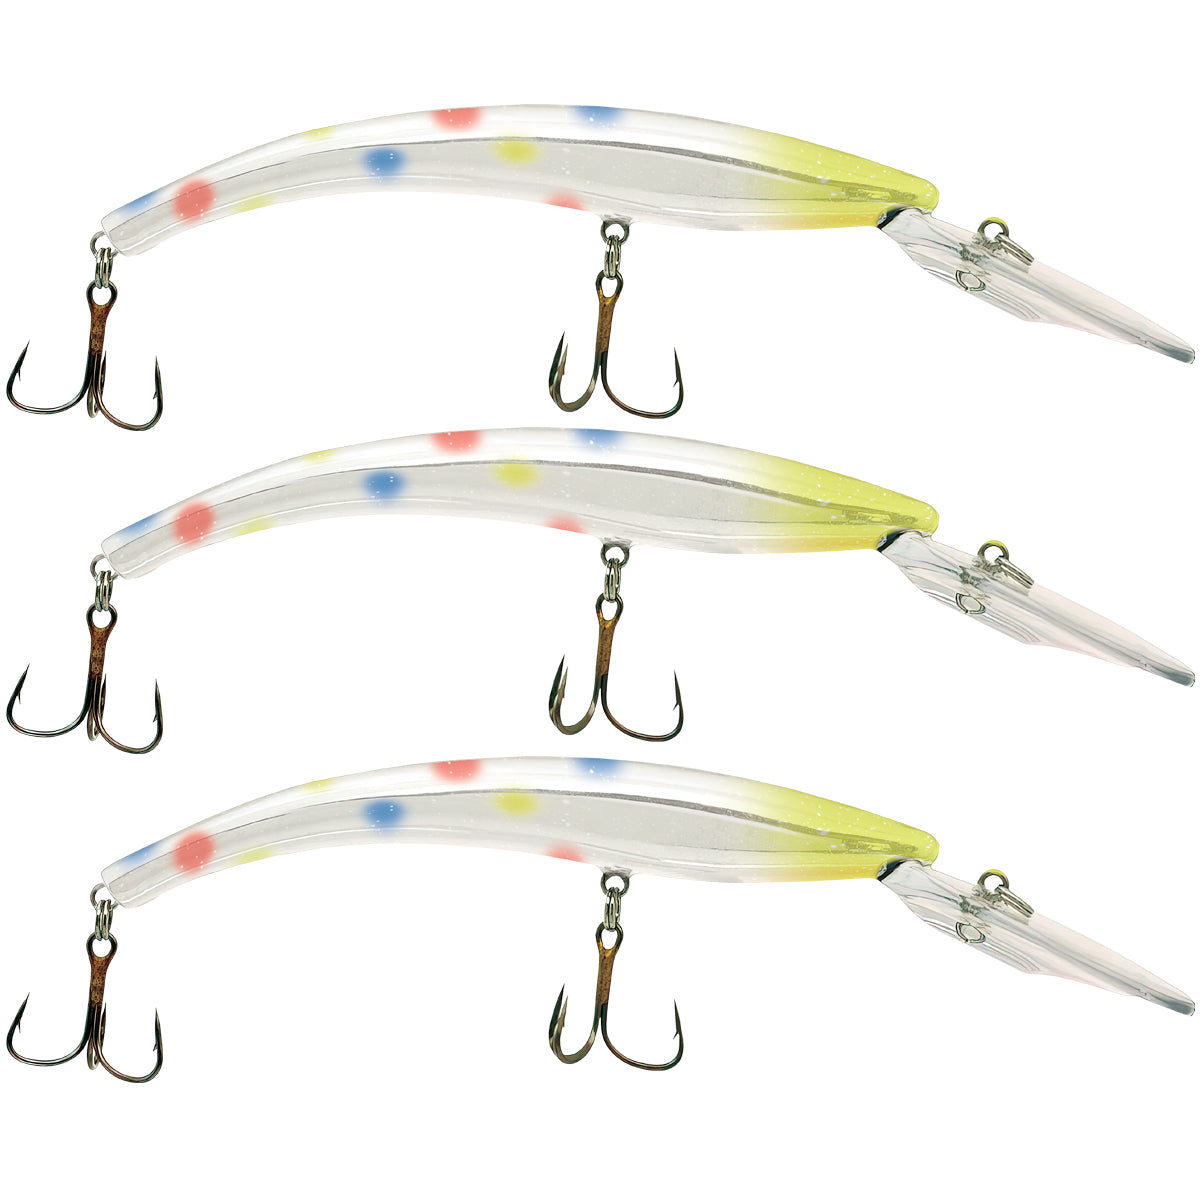 Reef Runner - 8003 Series - Deep Diver 3 Pack - Acme Tackle Company Glow Chartreuse Wonderbread Deep Diver 3 Pack